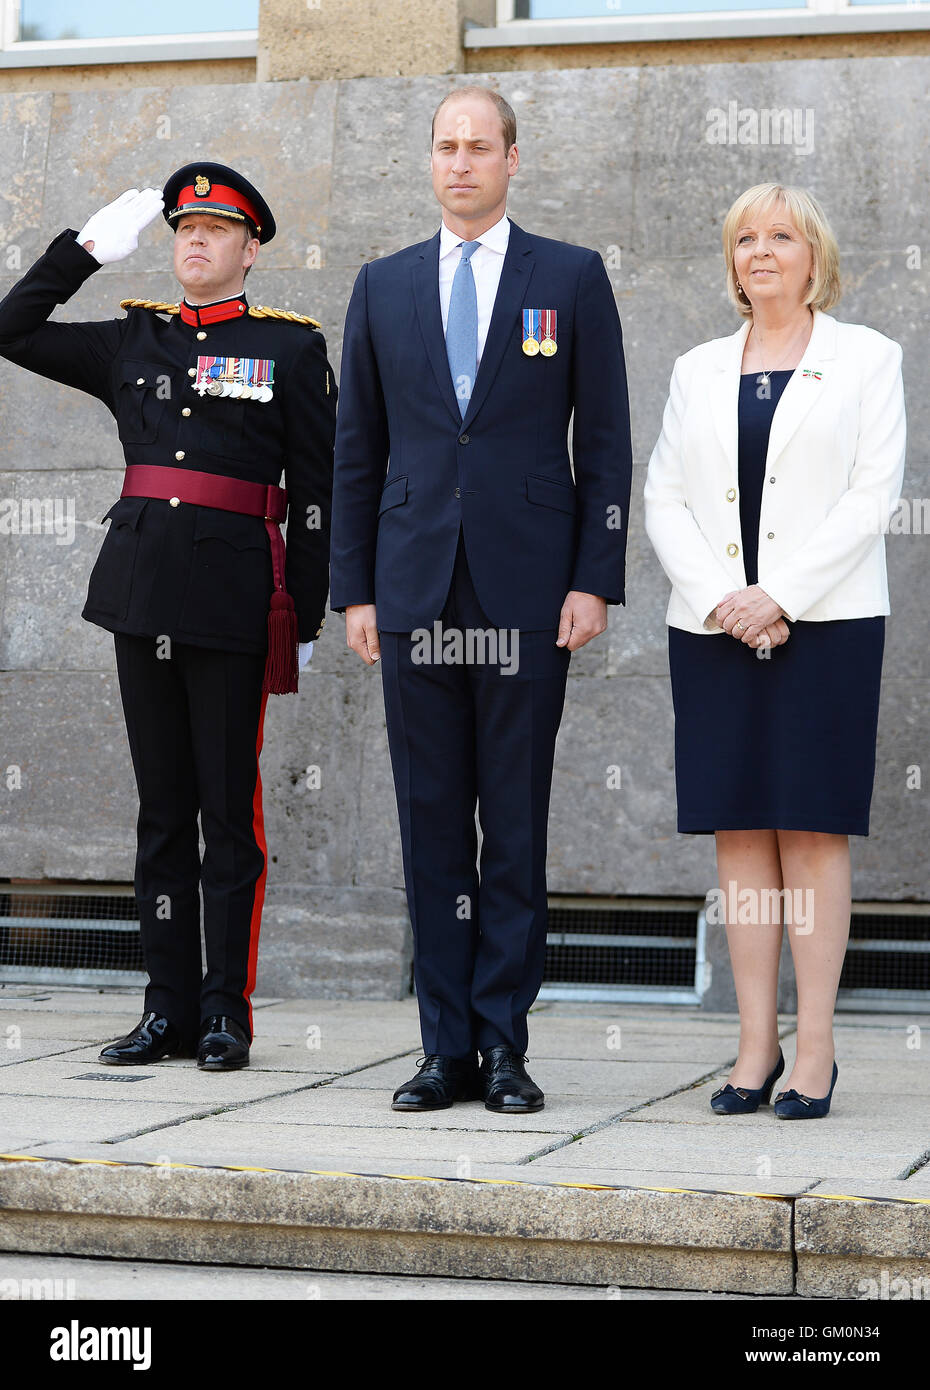 The Duke of Cambridge (centre) during a British Forces Germany (BFG) military parade with President Hannelore Kraft, minister of the North Rhine-Westphalia region of Germany, during a visit to Dusseldorf. Stock Photo